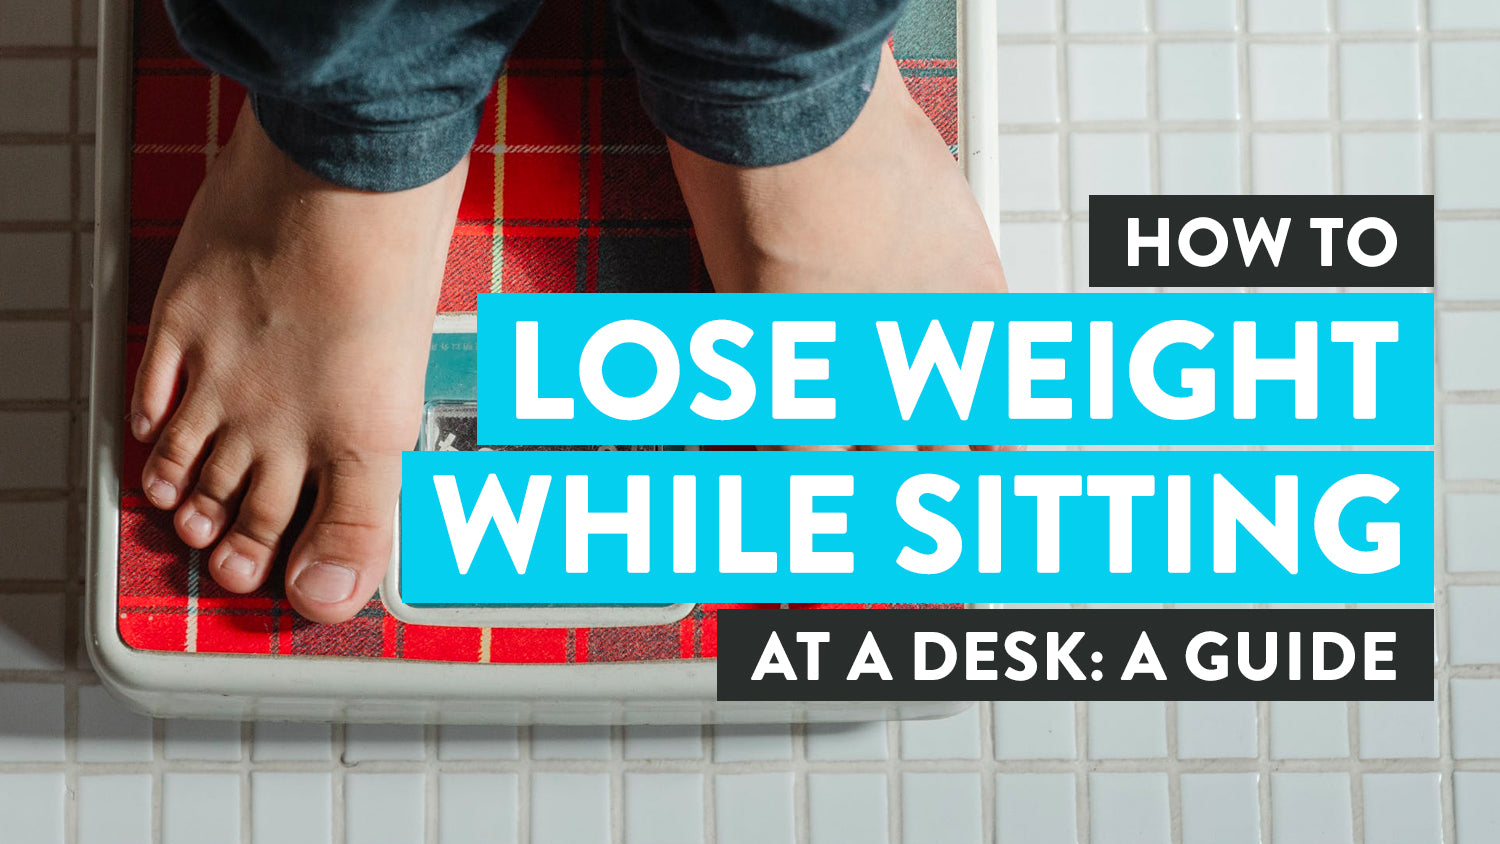 Everything You Need to Know to Lose Weight at Your Desk: Health Guide